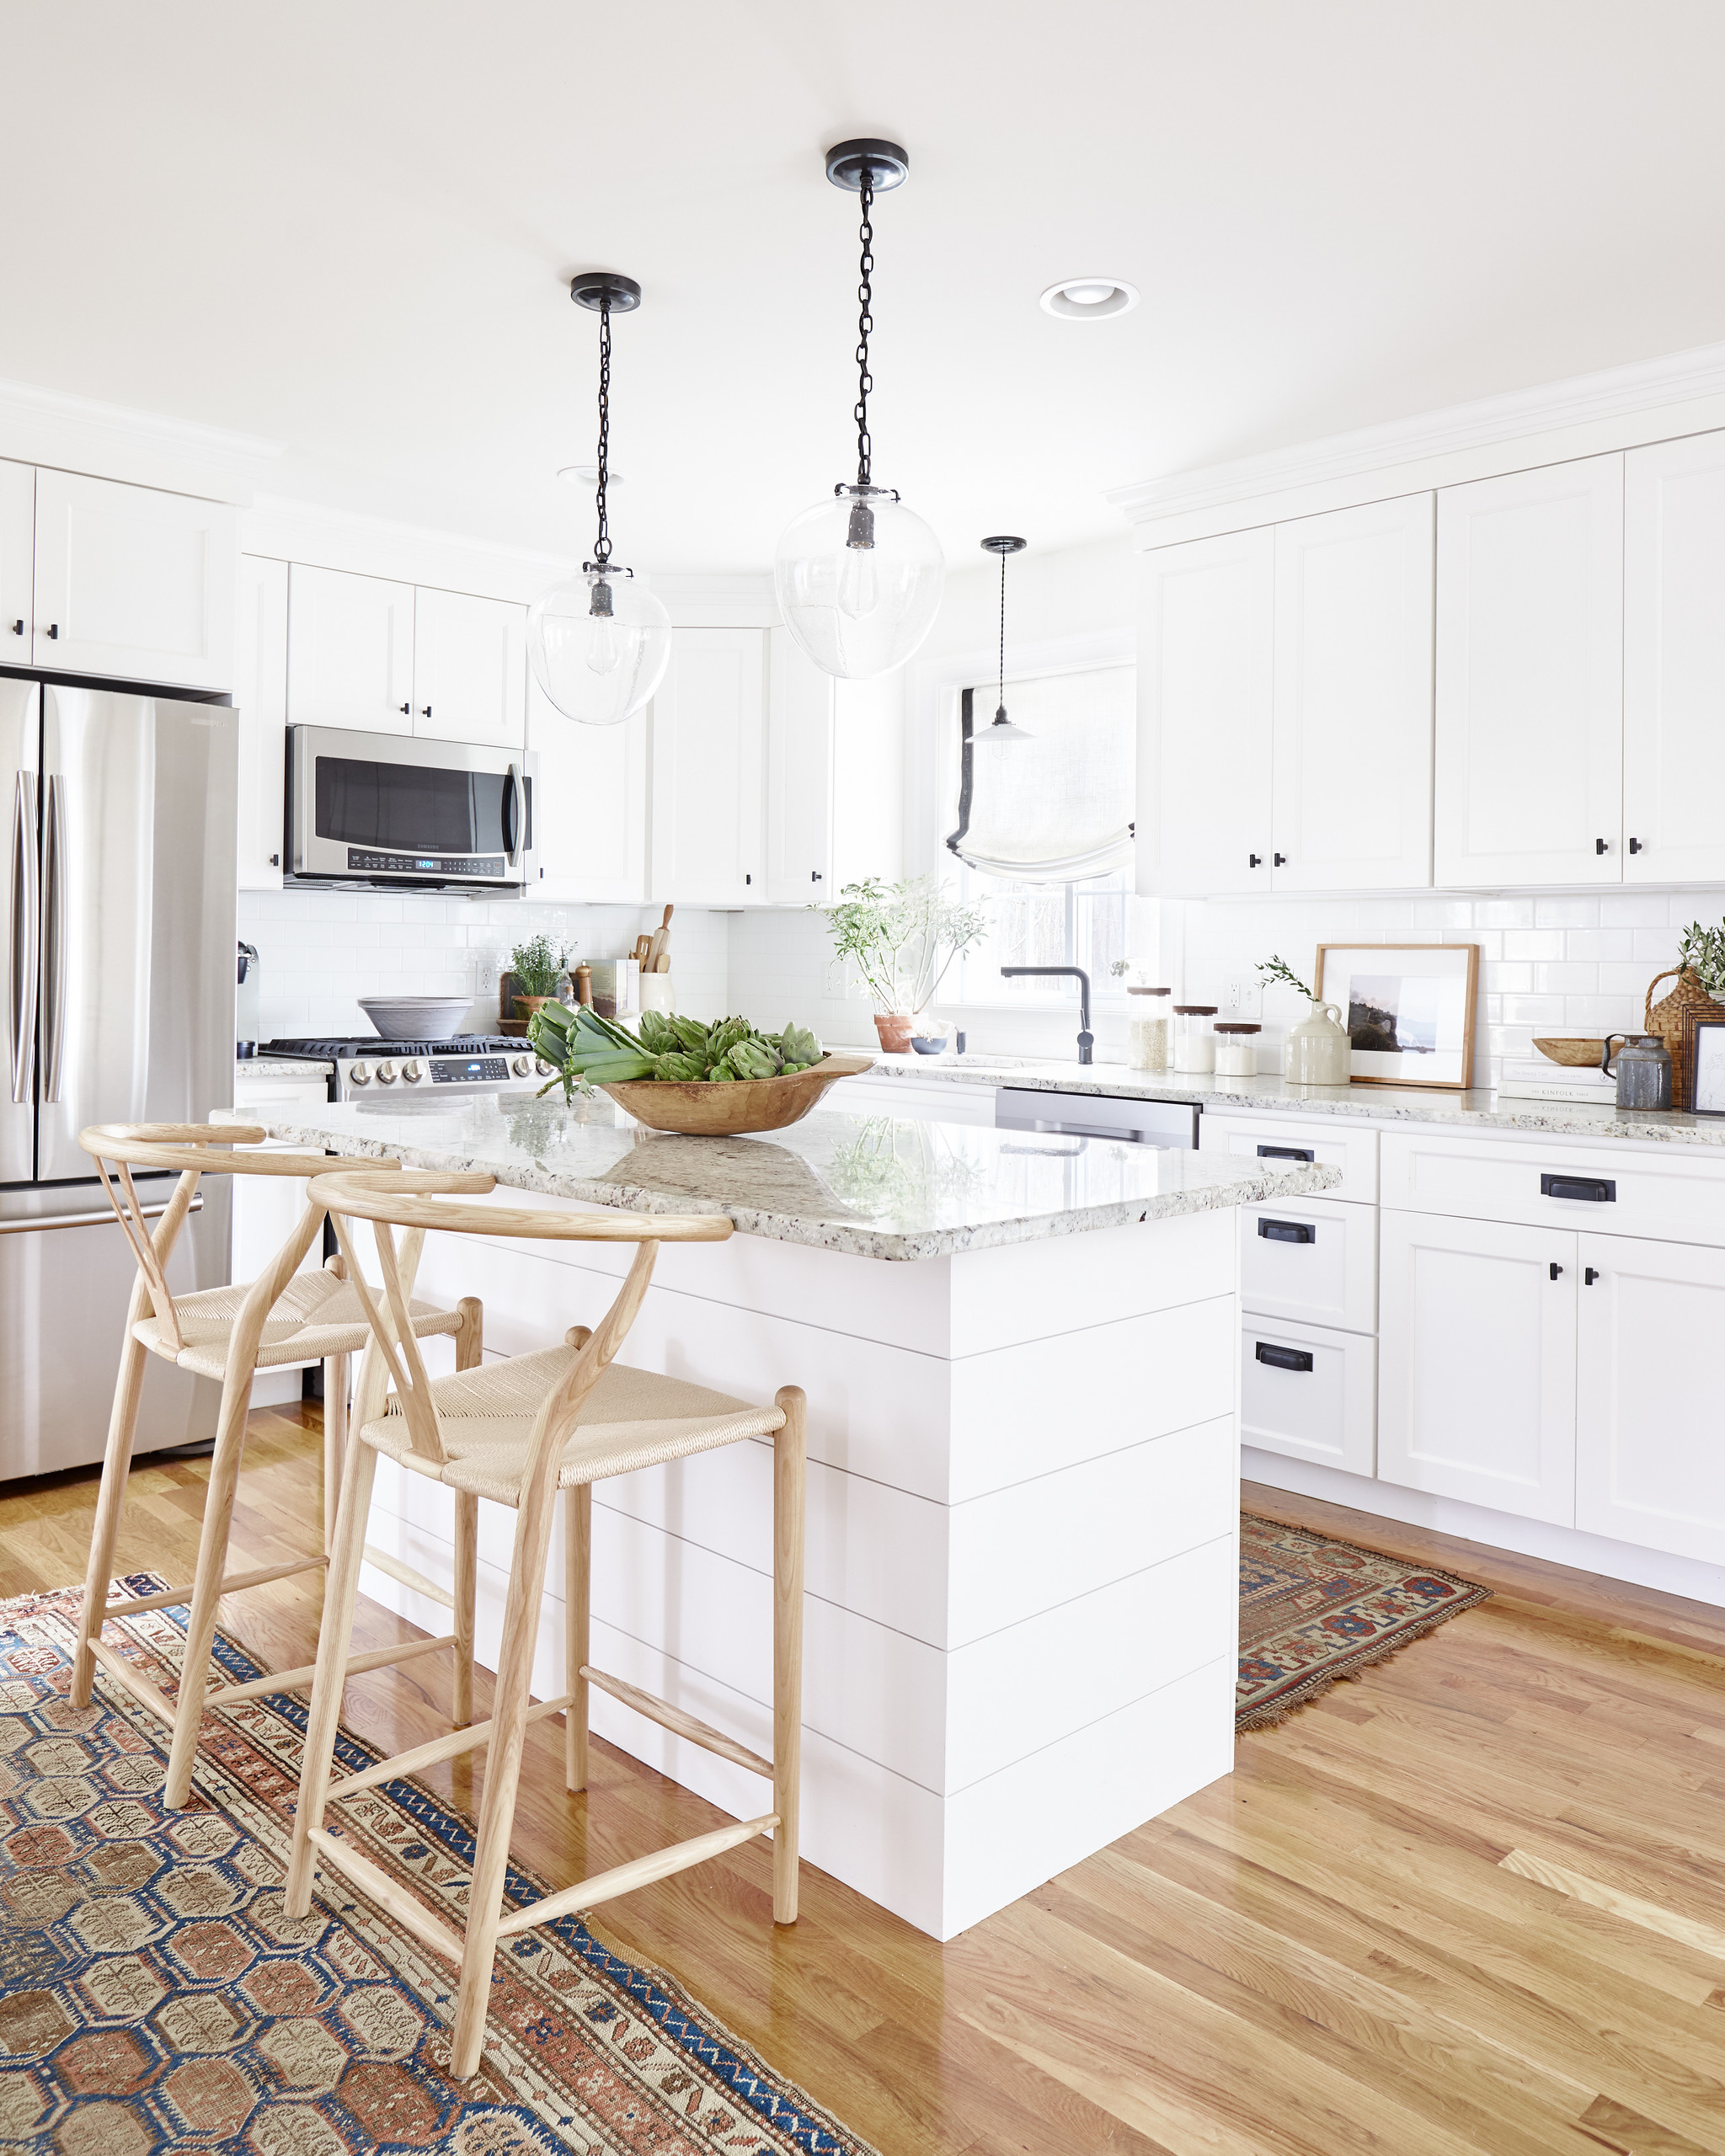 20 Small L Shaped Kitchen Ideas You'll Love   August, 20   Houzz